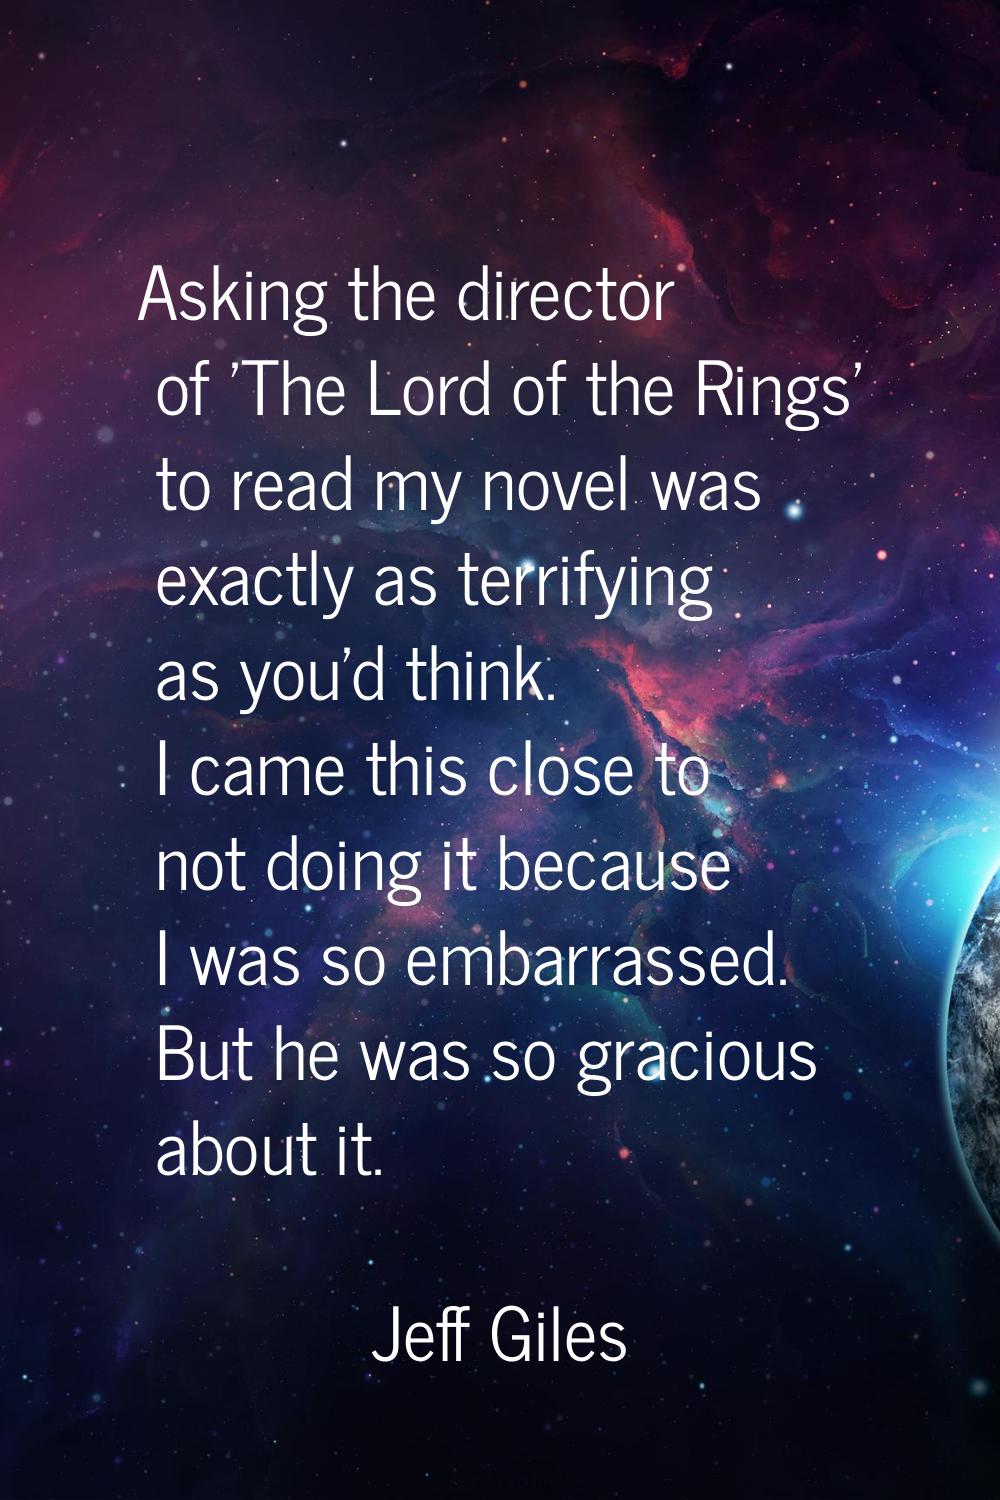 Asking the director of 'The Lord of the Rings' to read my novel was exactly as terrifying as you'd 